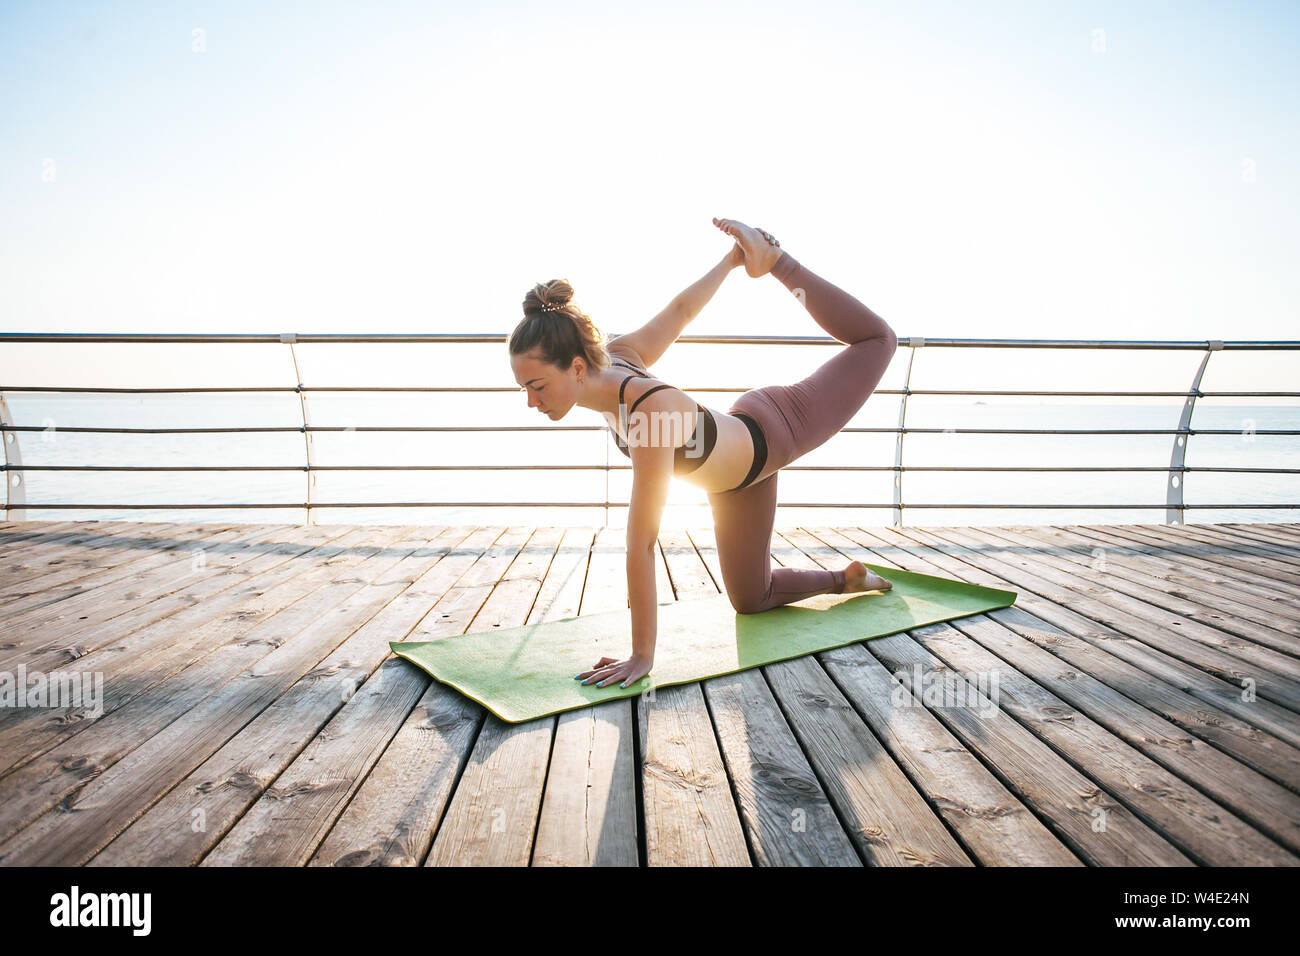 Woman doing yoga outside on the wooden floor. Stock Photo